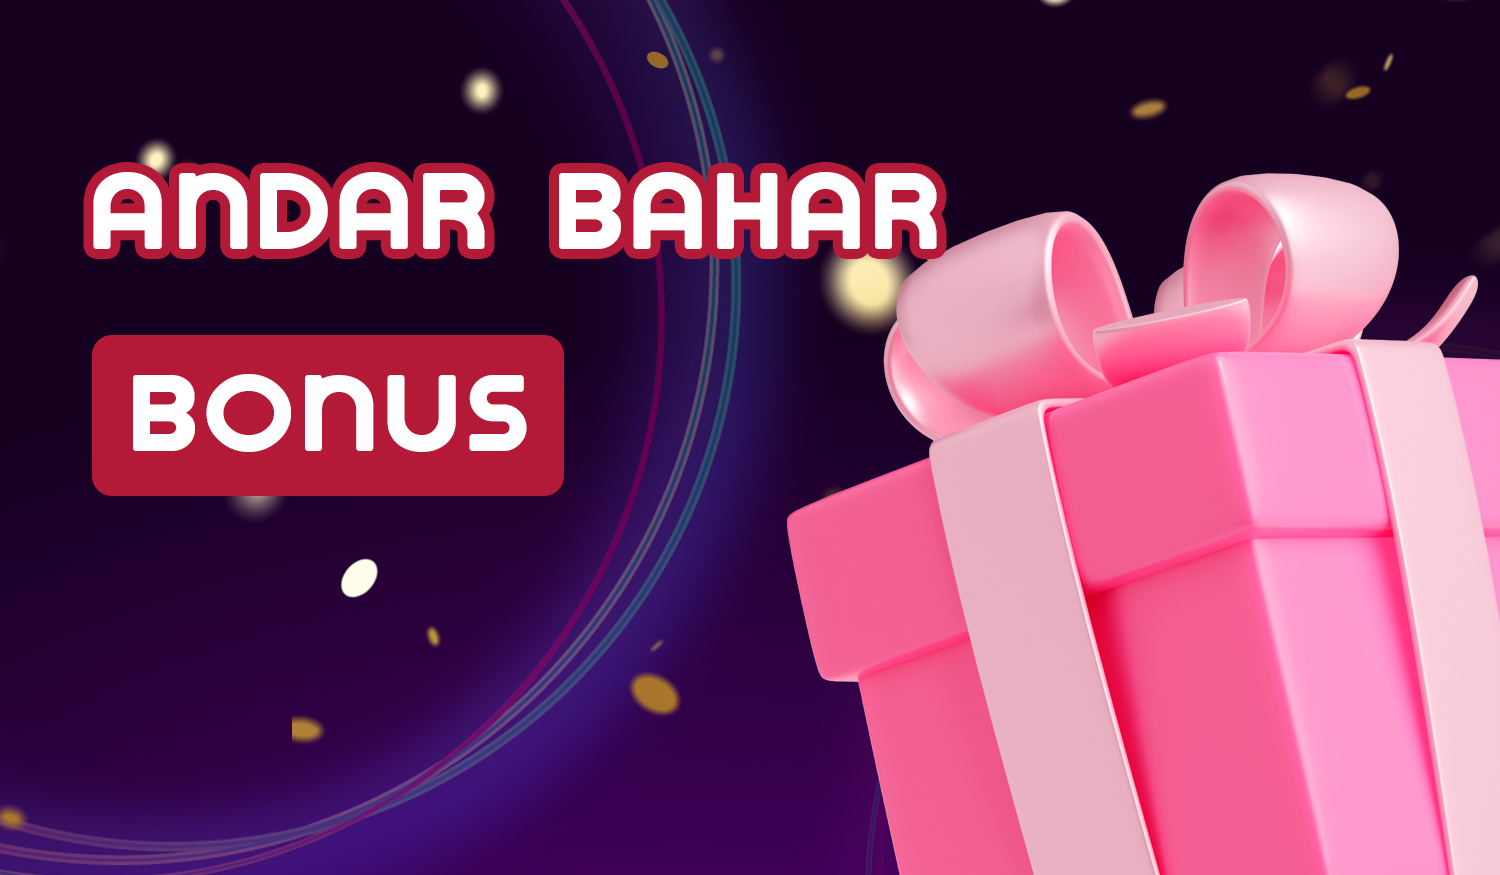 What bonuses, promo codes and promotions can be obtained while playing Andar Bahar online